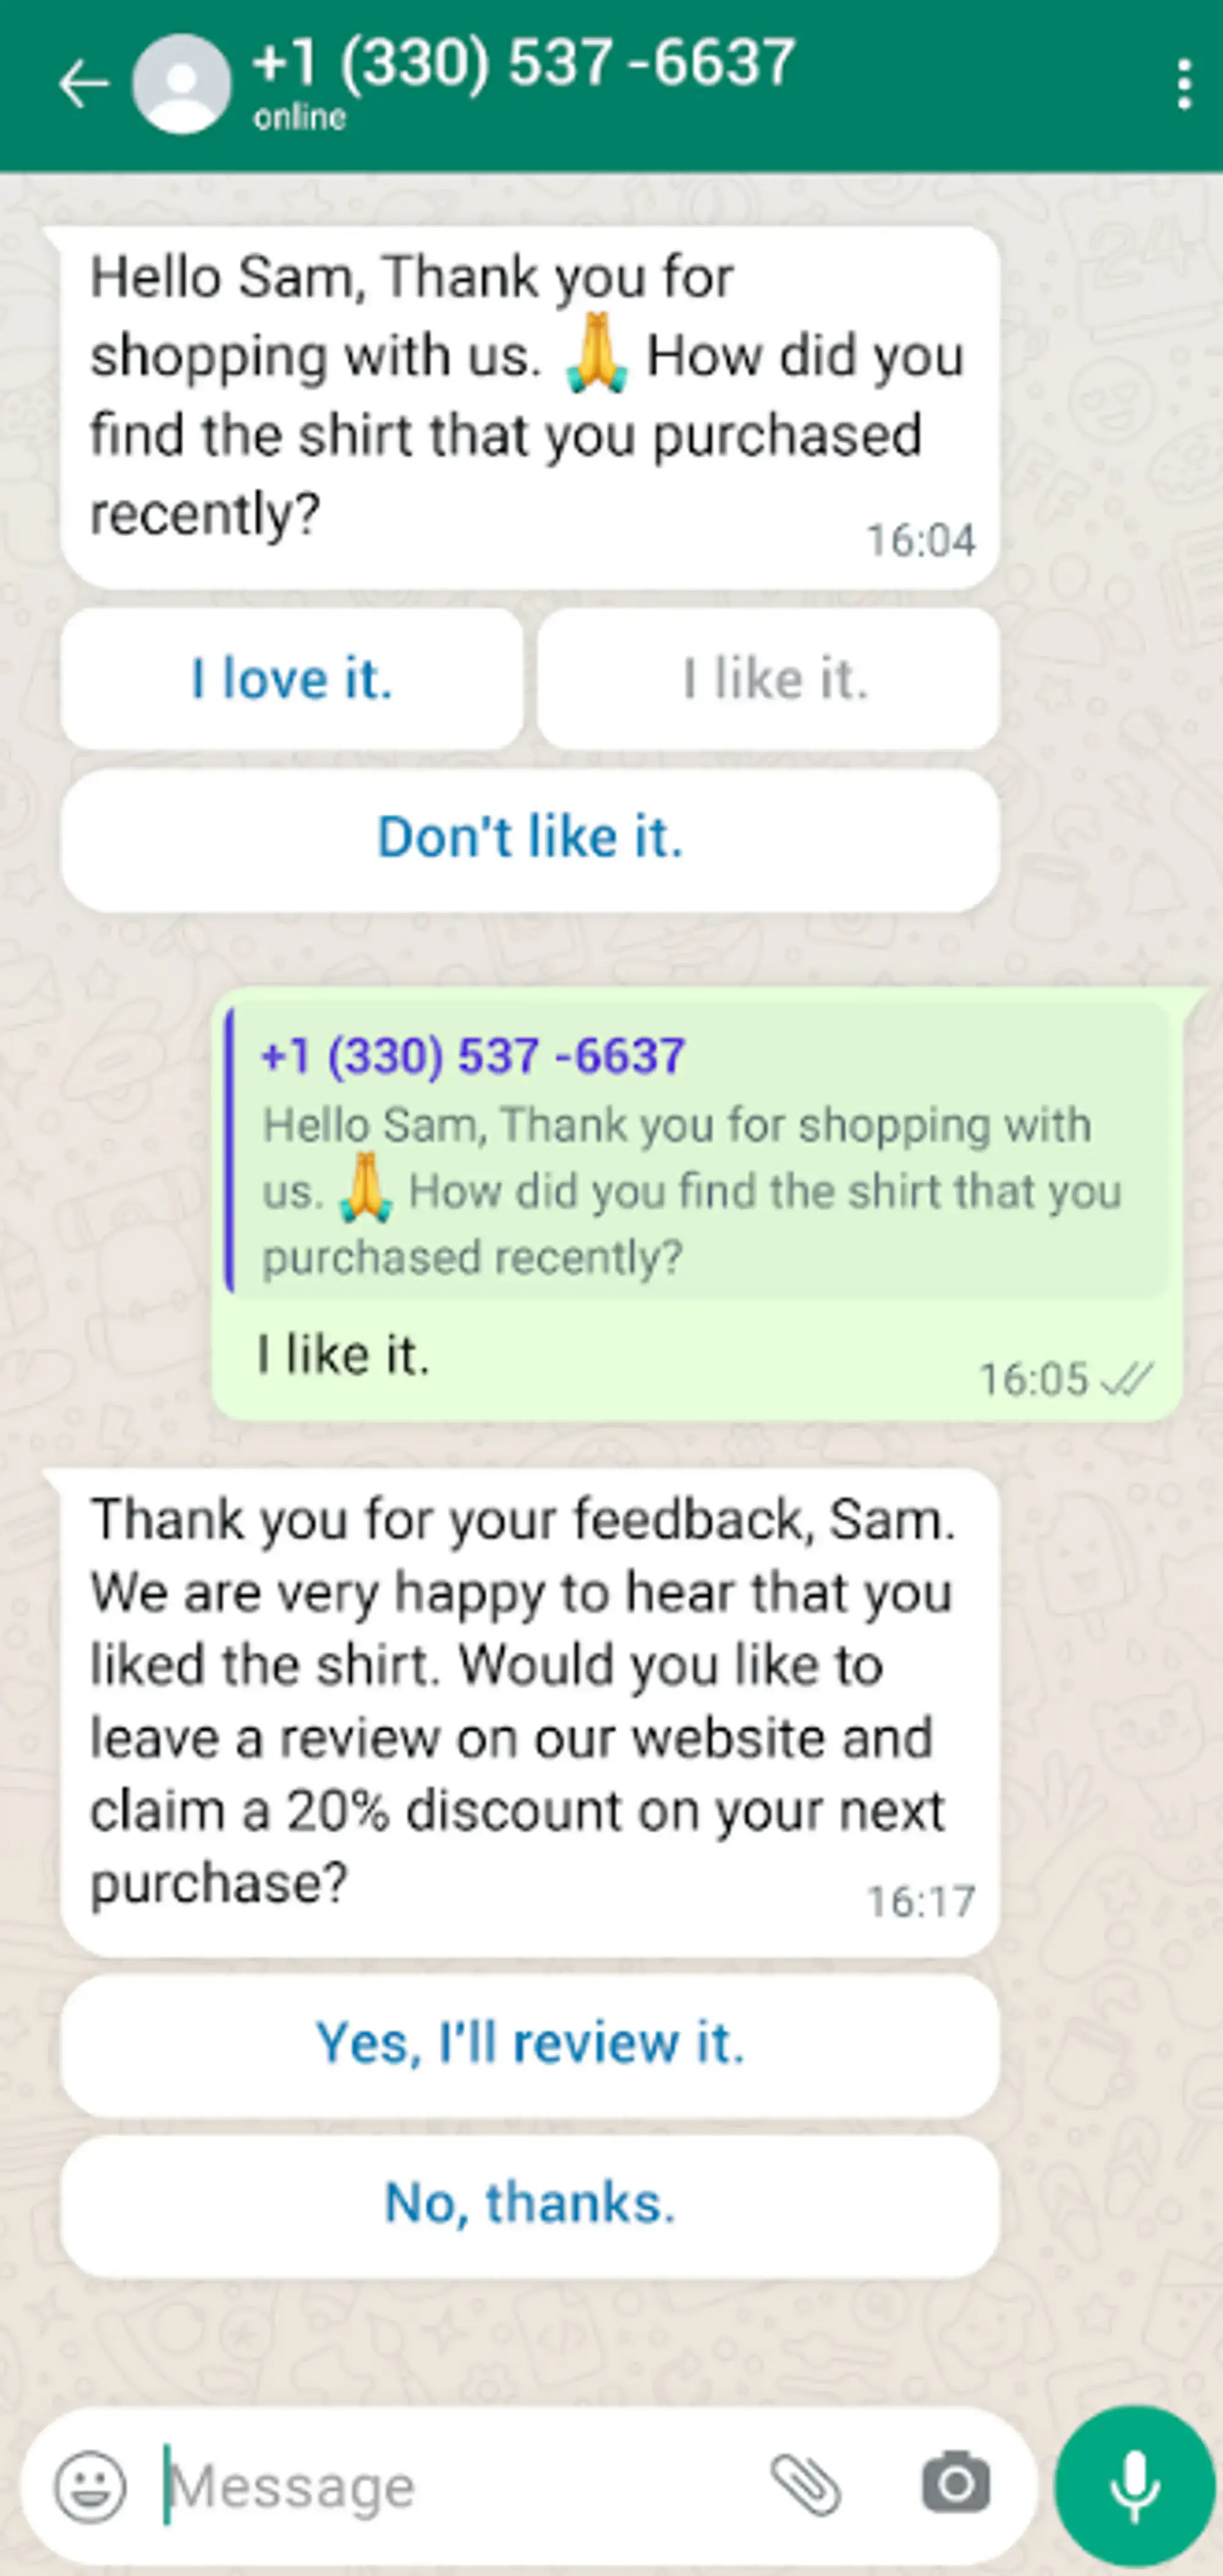 Interactive WhatsApp message asking for a review.